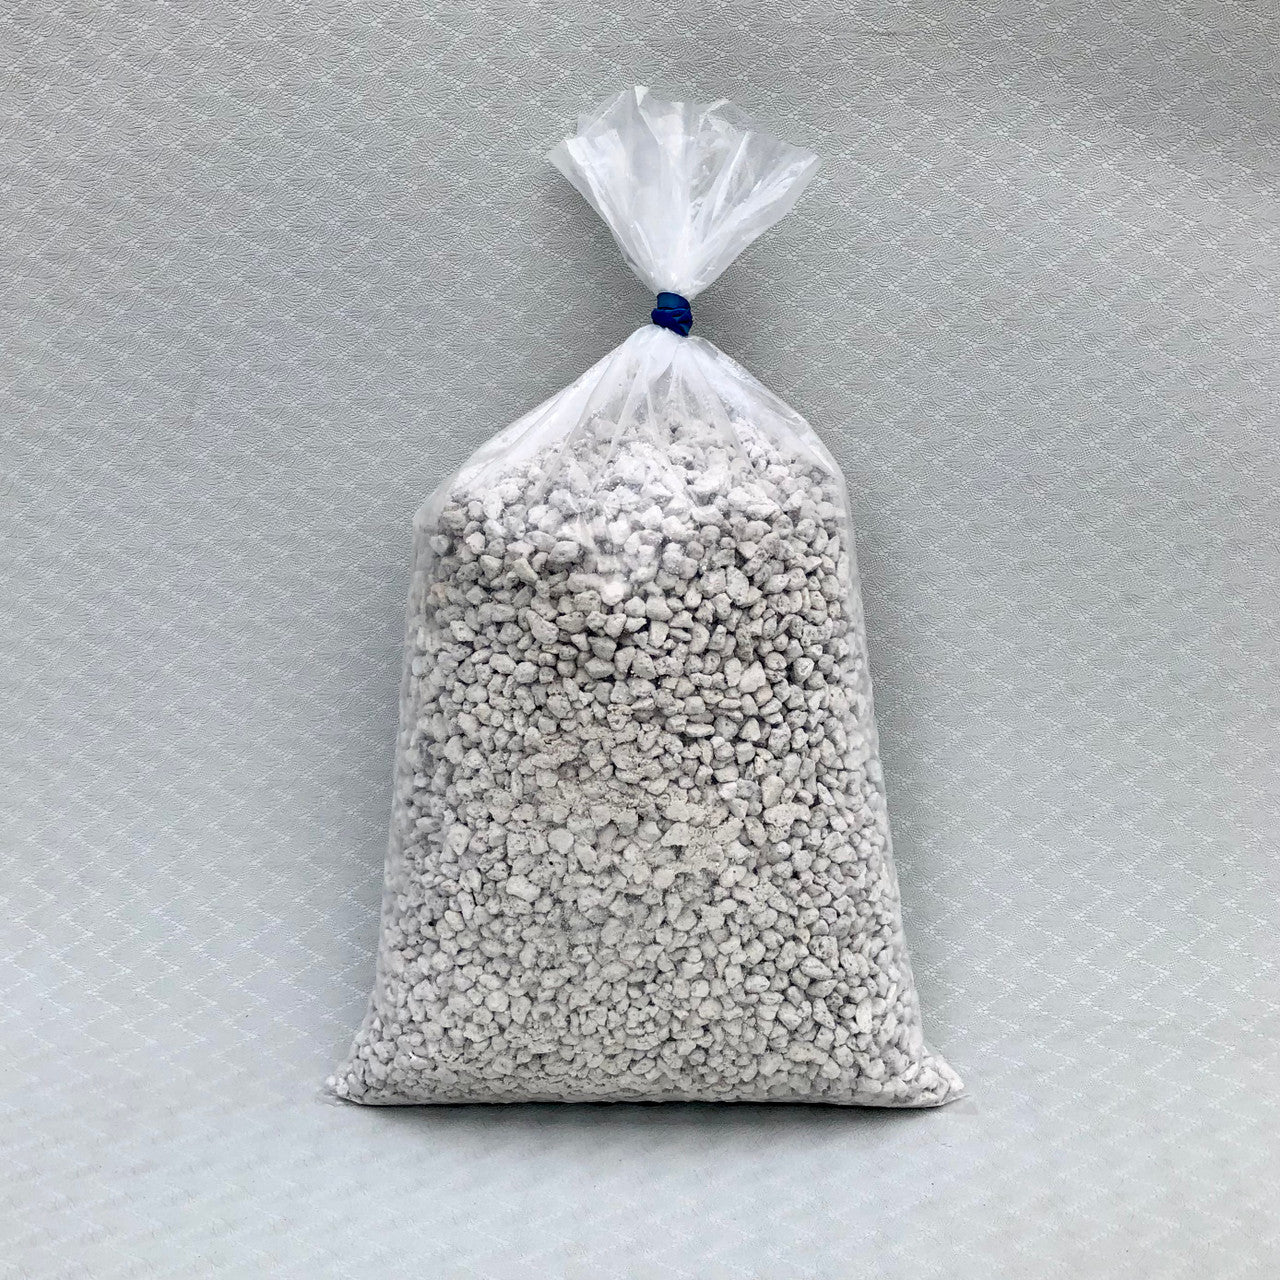 5 pound bag of horticultural pumice